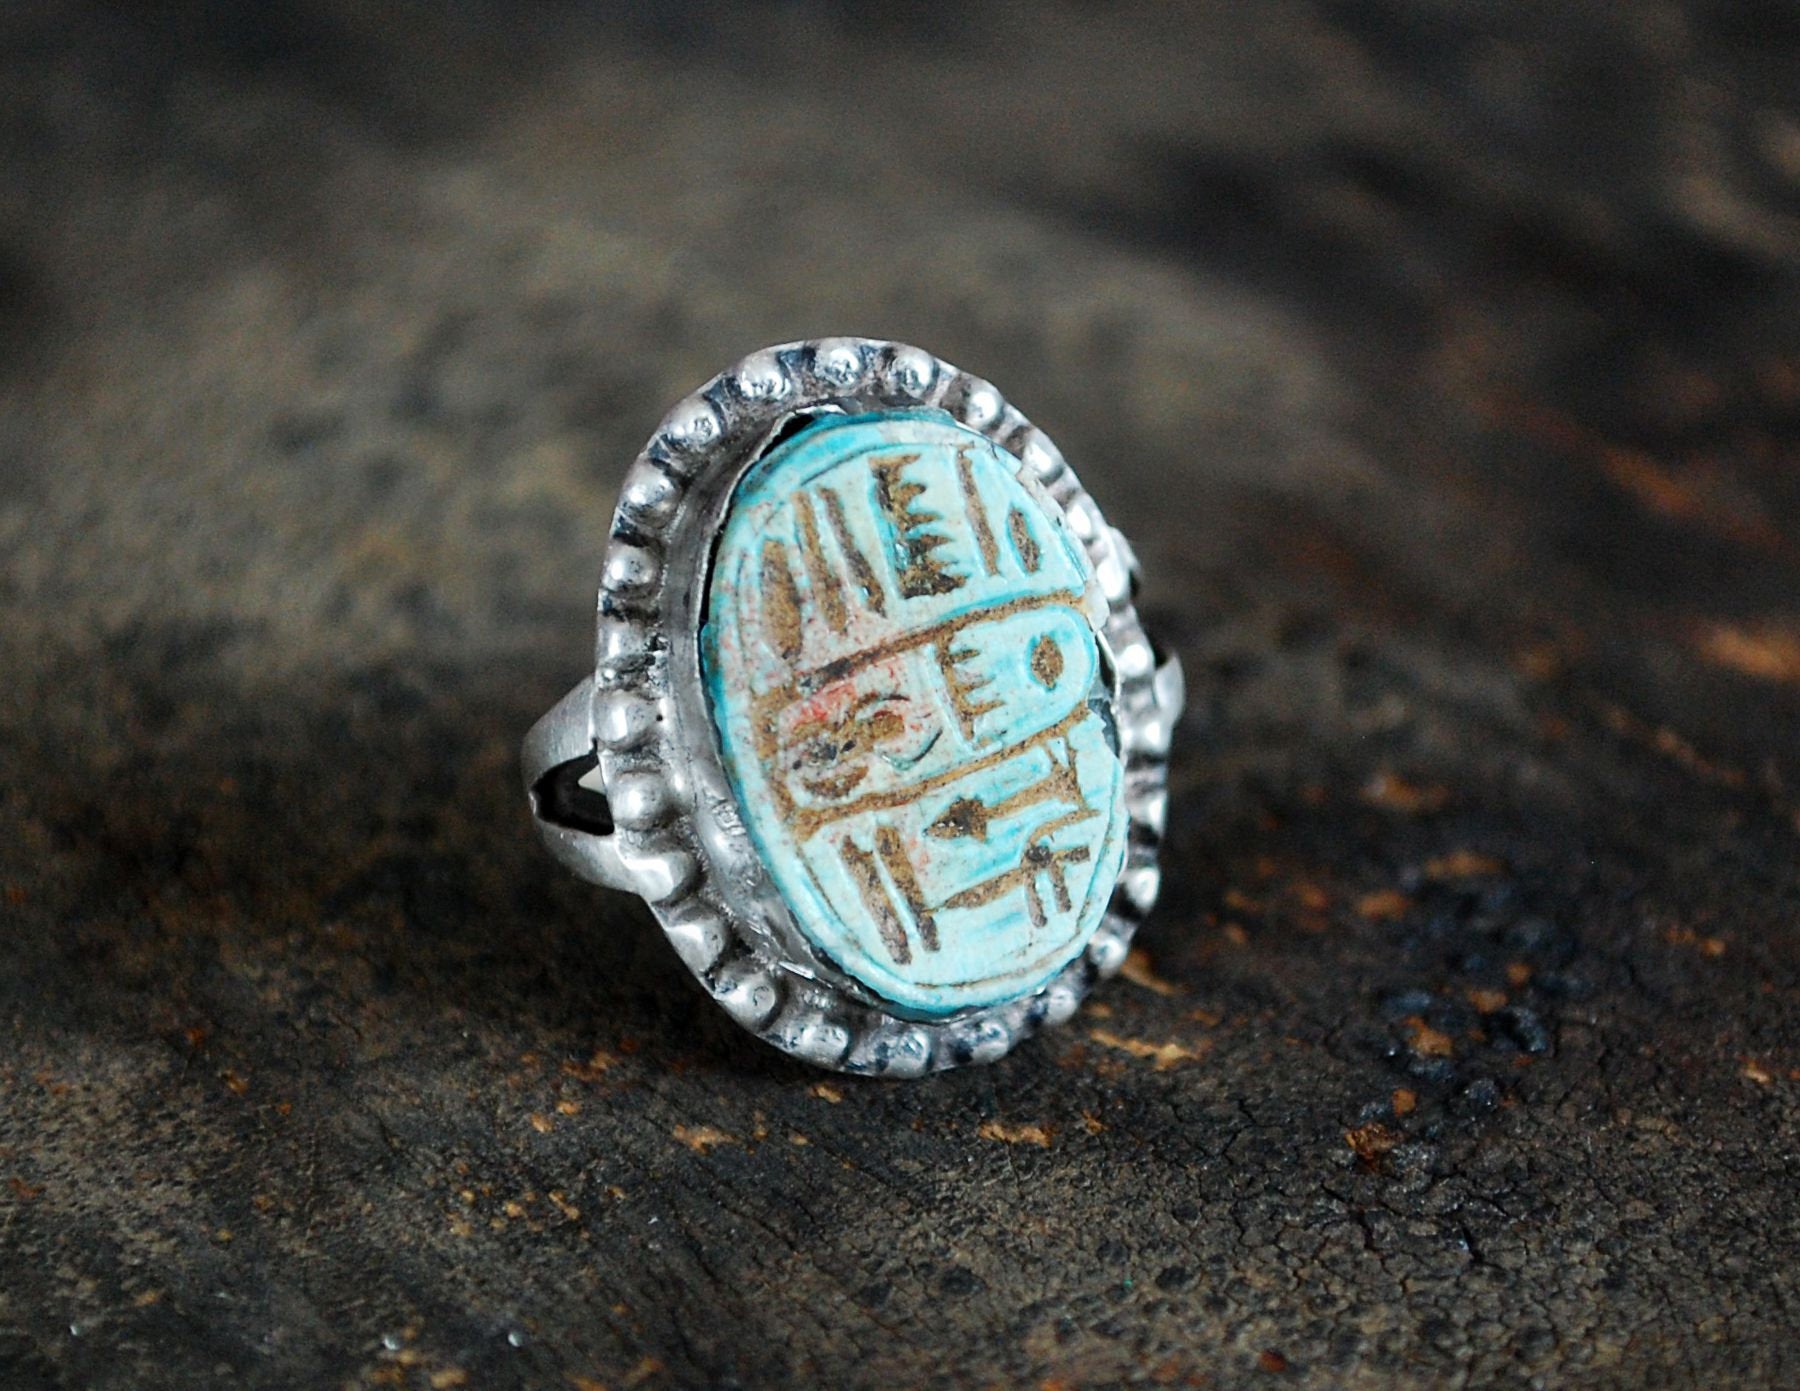 Hieroglyph Soapstone Ring from Egypt - Size 5 - Egyptian Ring - Vintage Egypt Ring - Egyptian Jewelry - Soapstone Jewelry